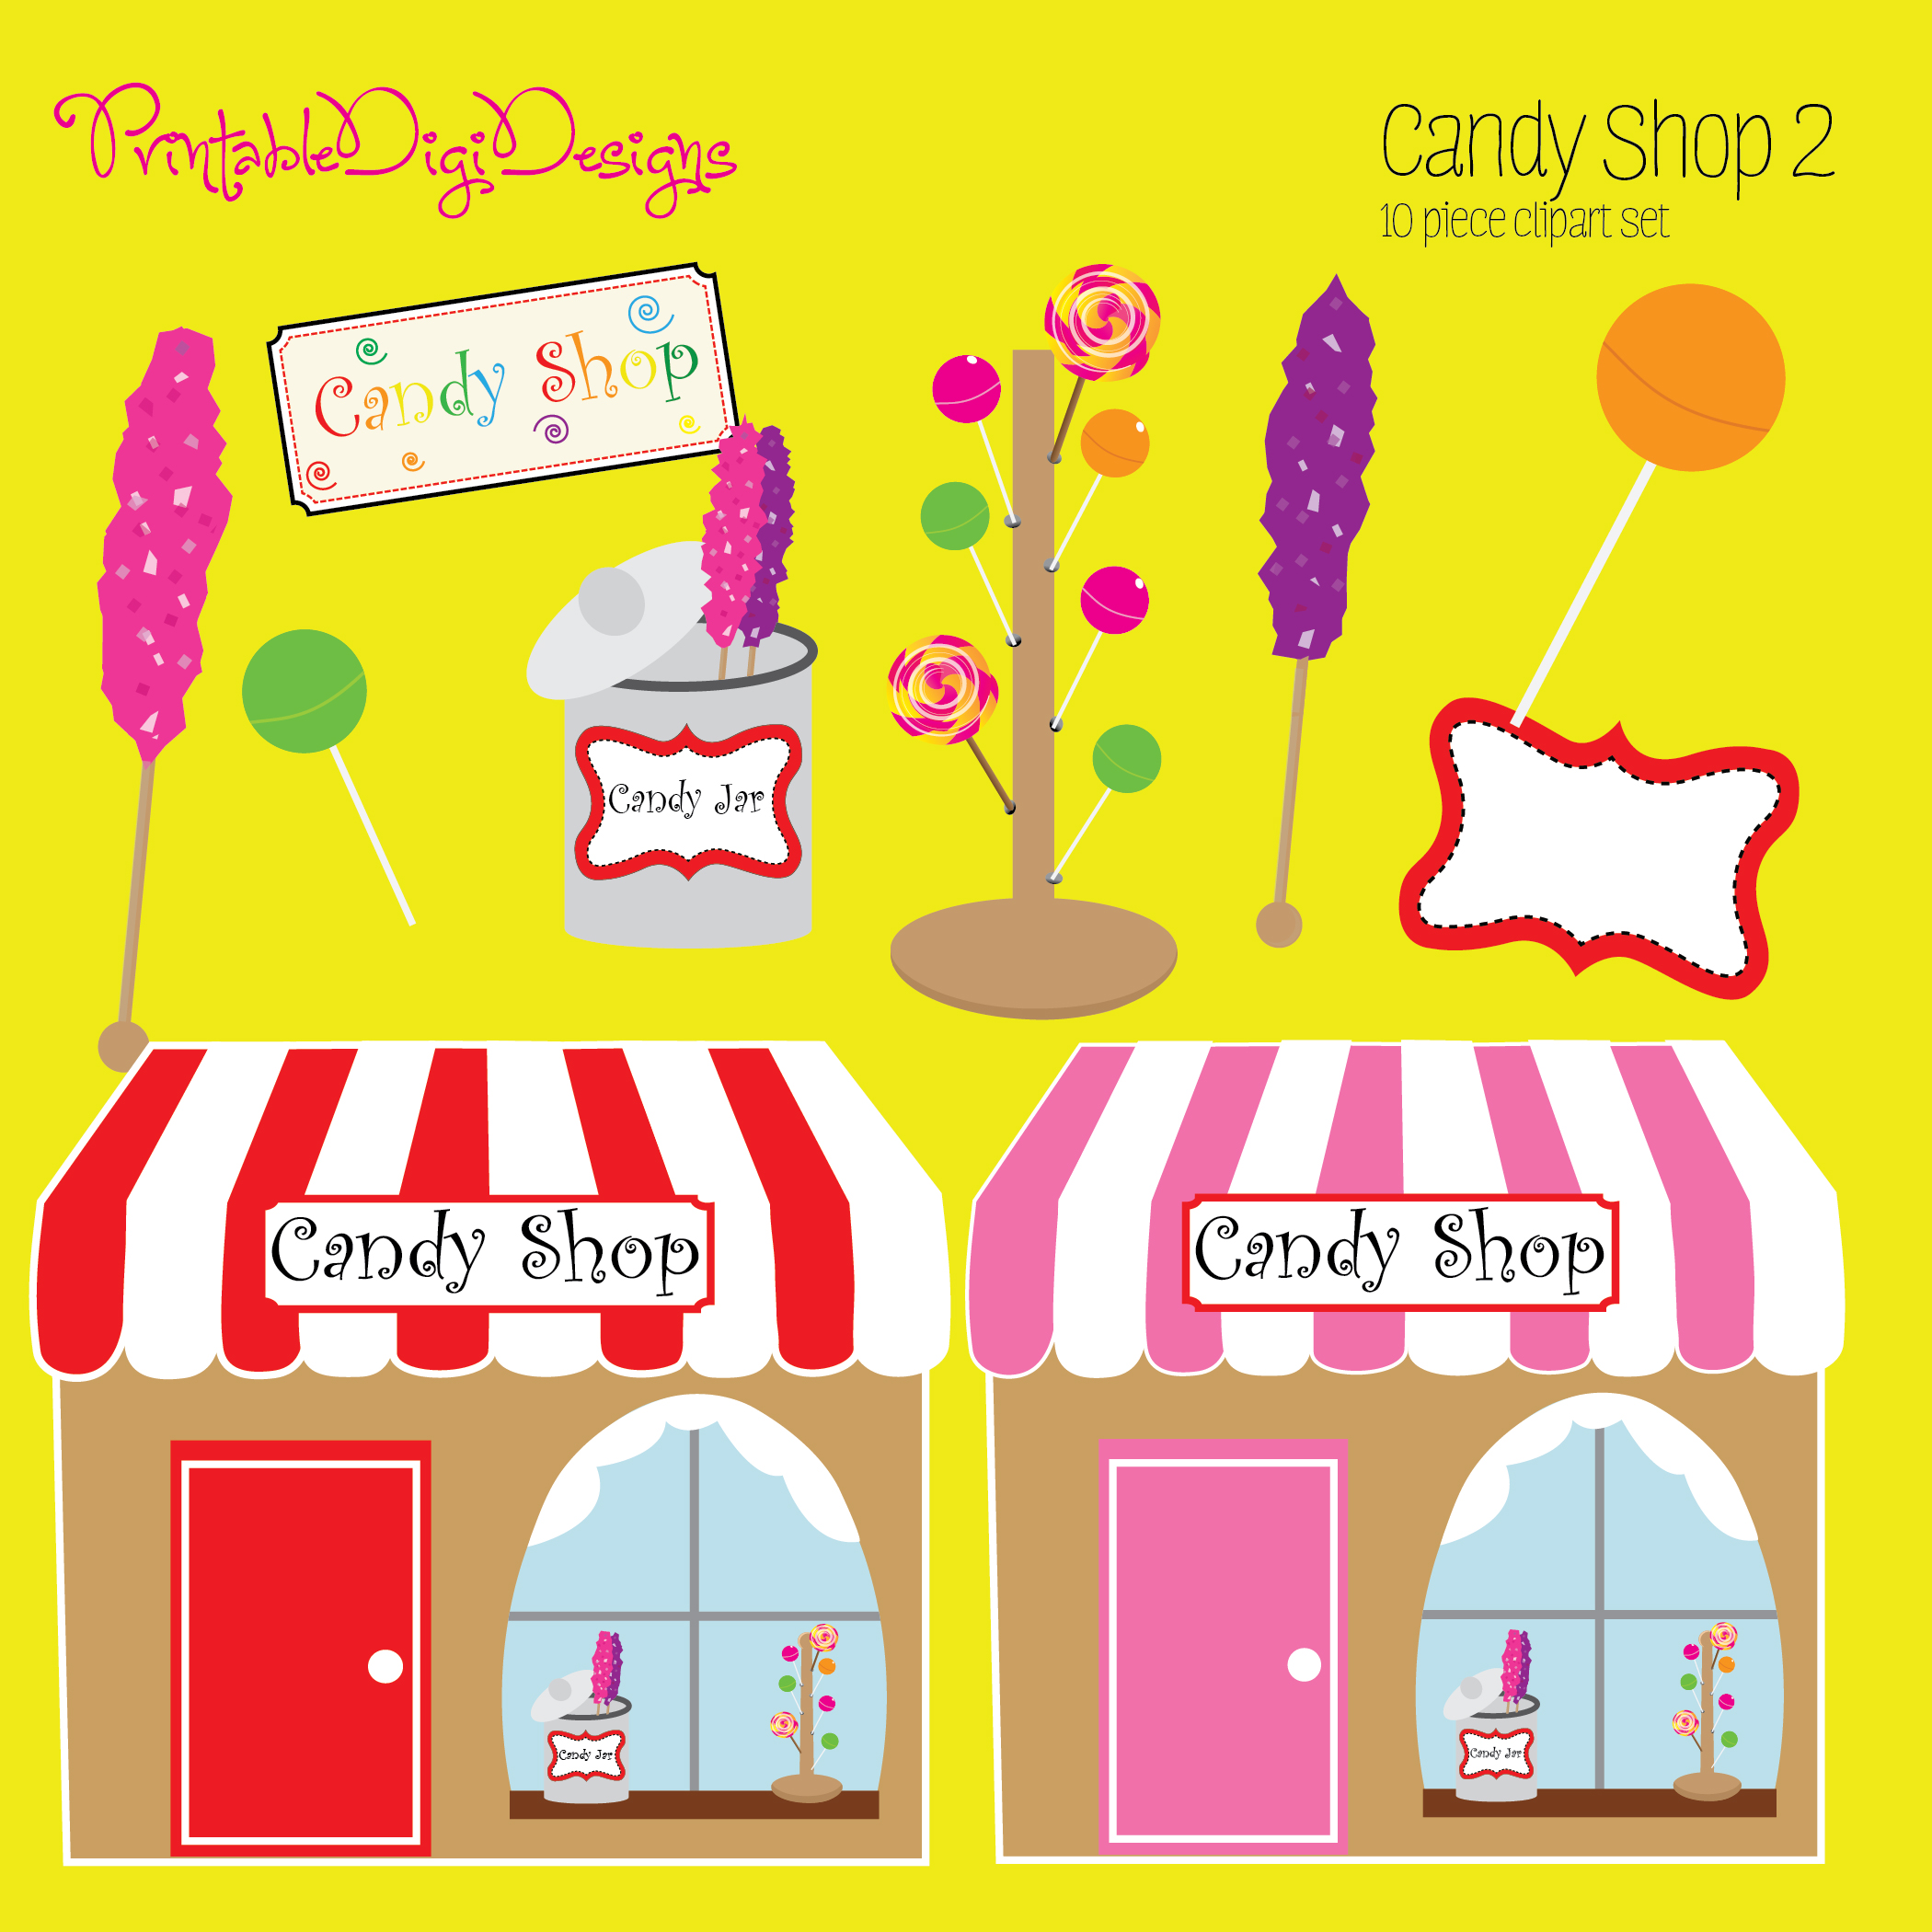 Candy Shop 2 Clipart Graphic Set   3 50 Sweet Candy Shop 2 Clipart